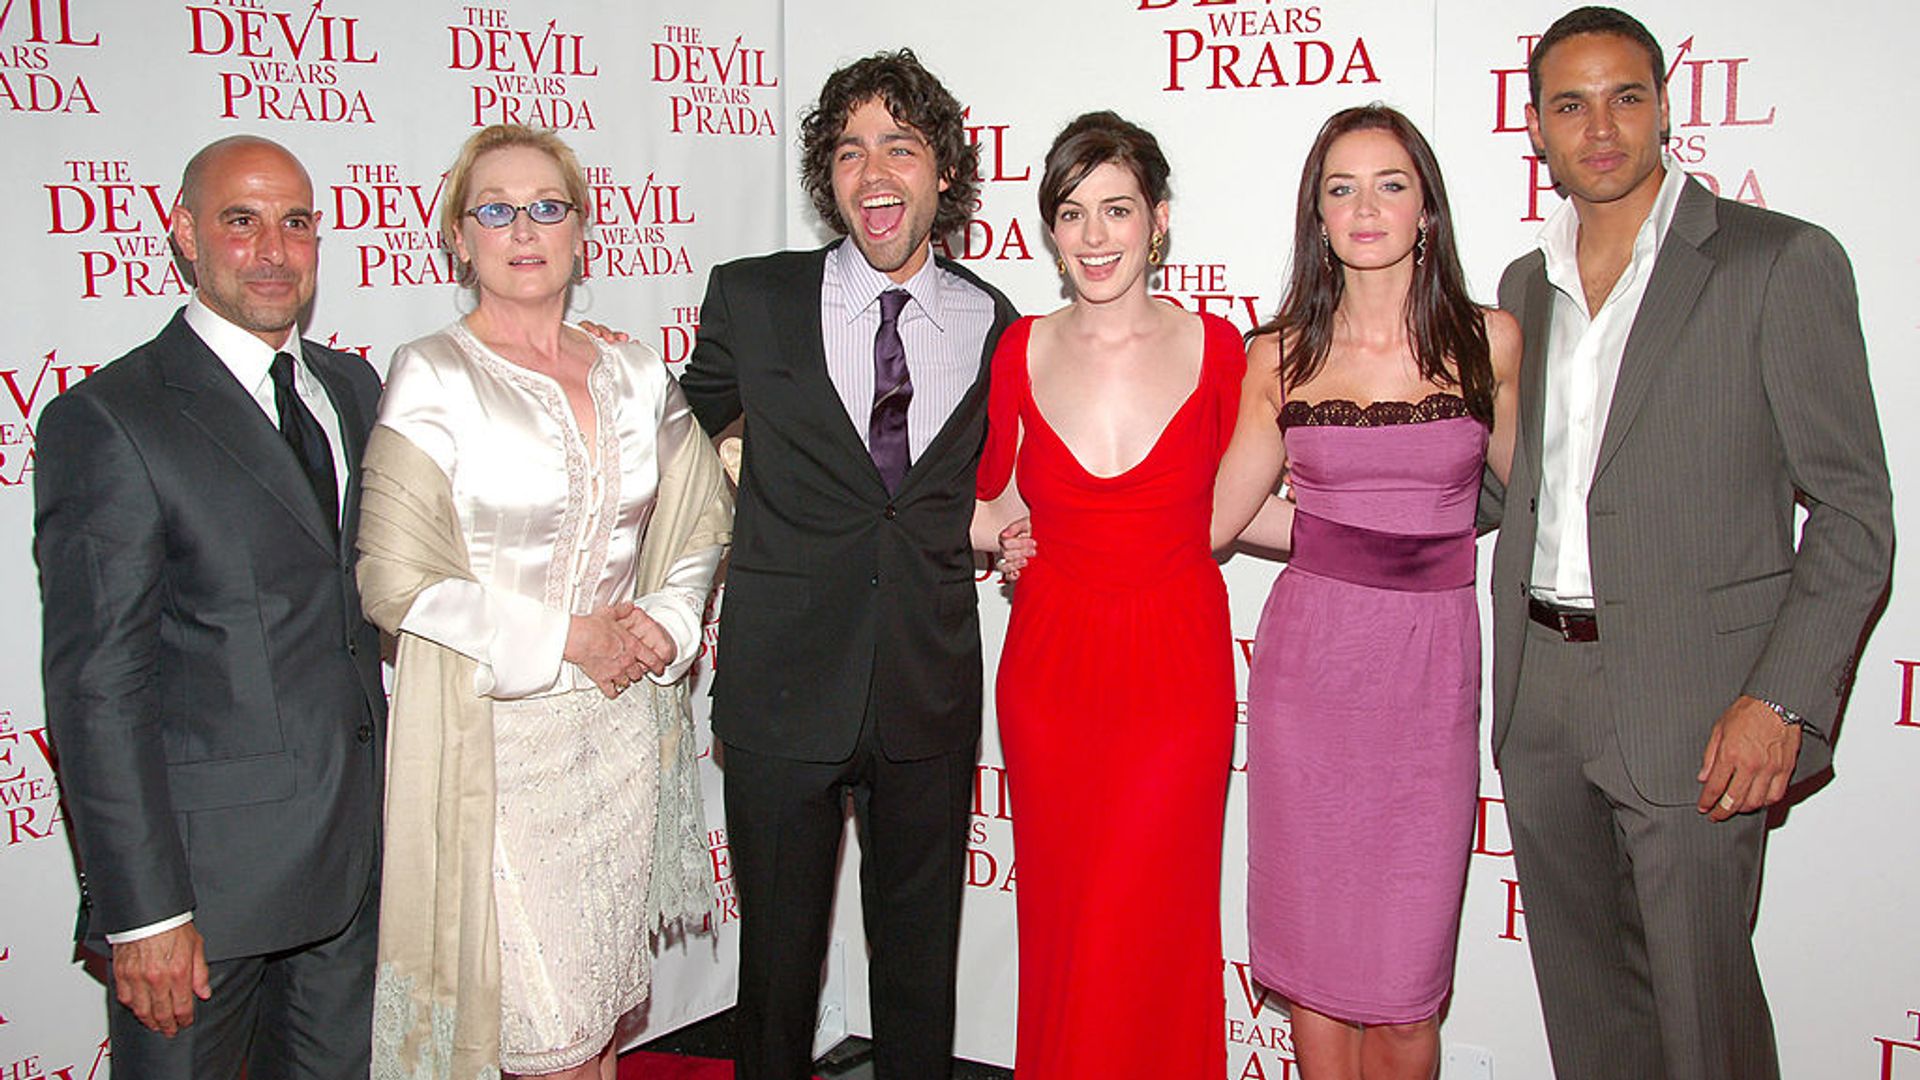 Stanley with his Devil Wears Prada co-stars at the premiere in 2006